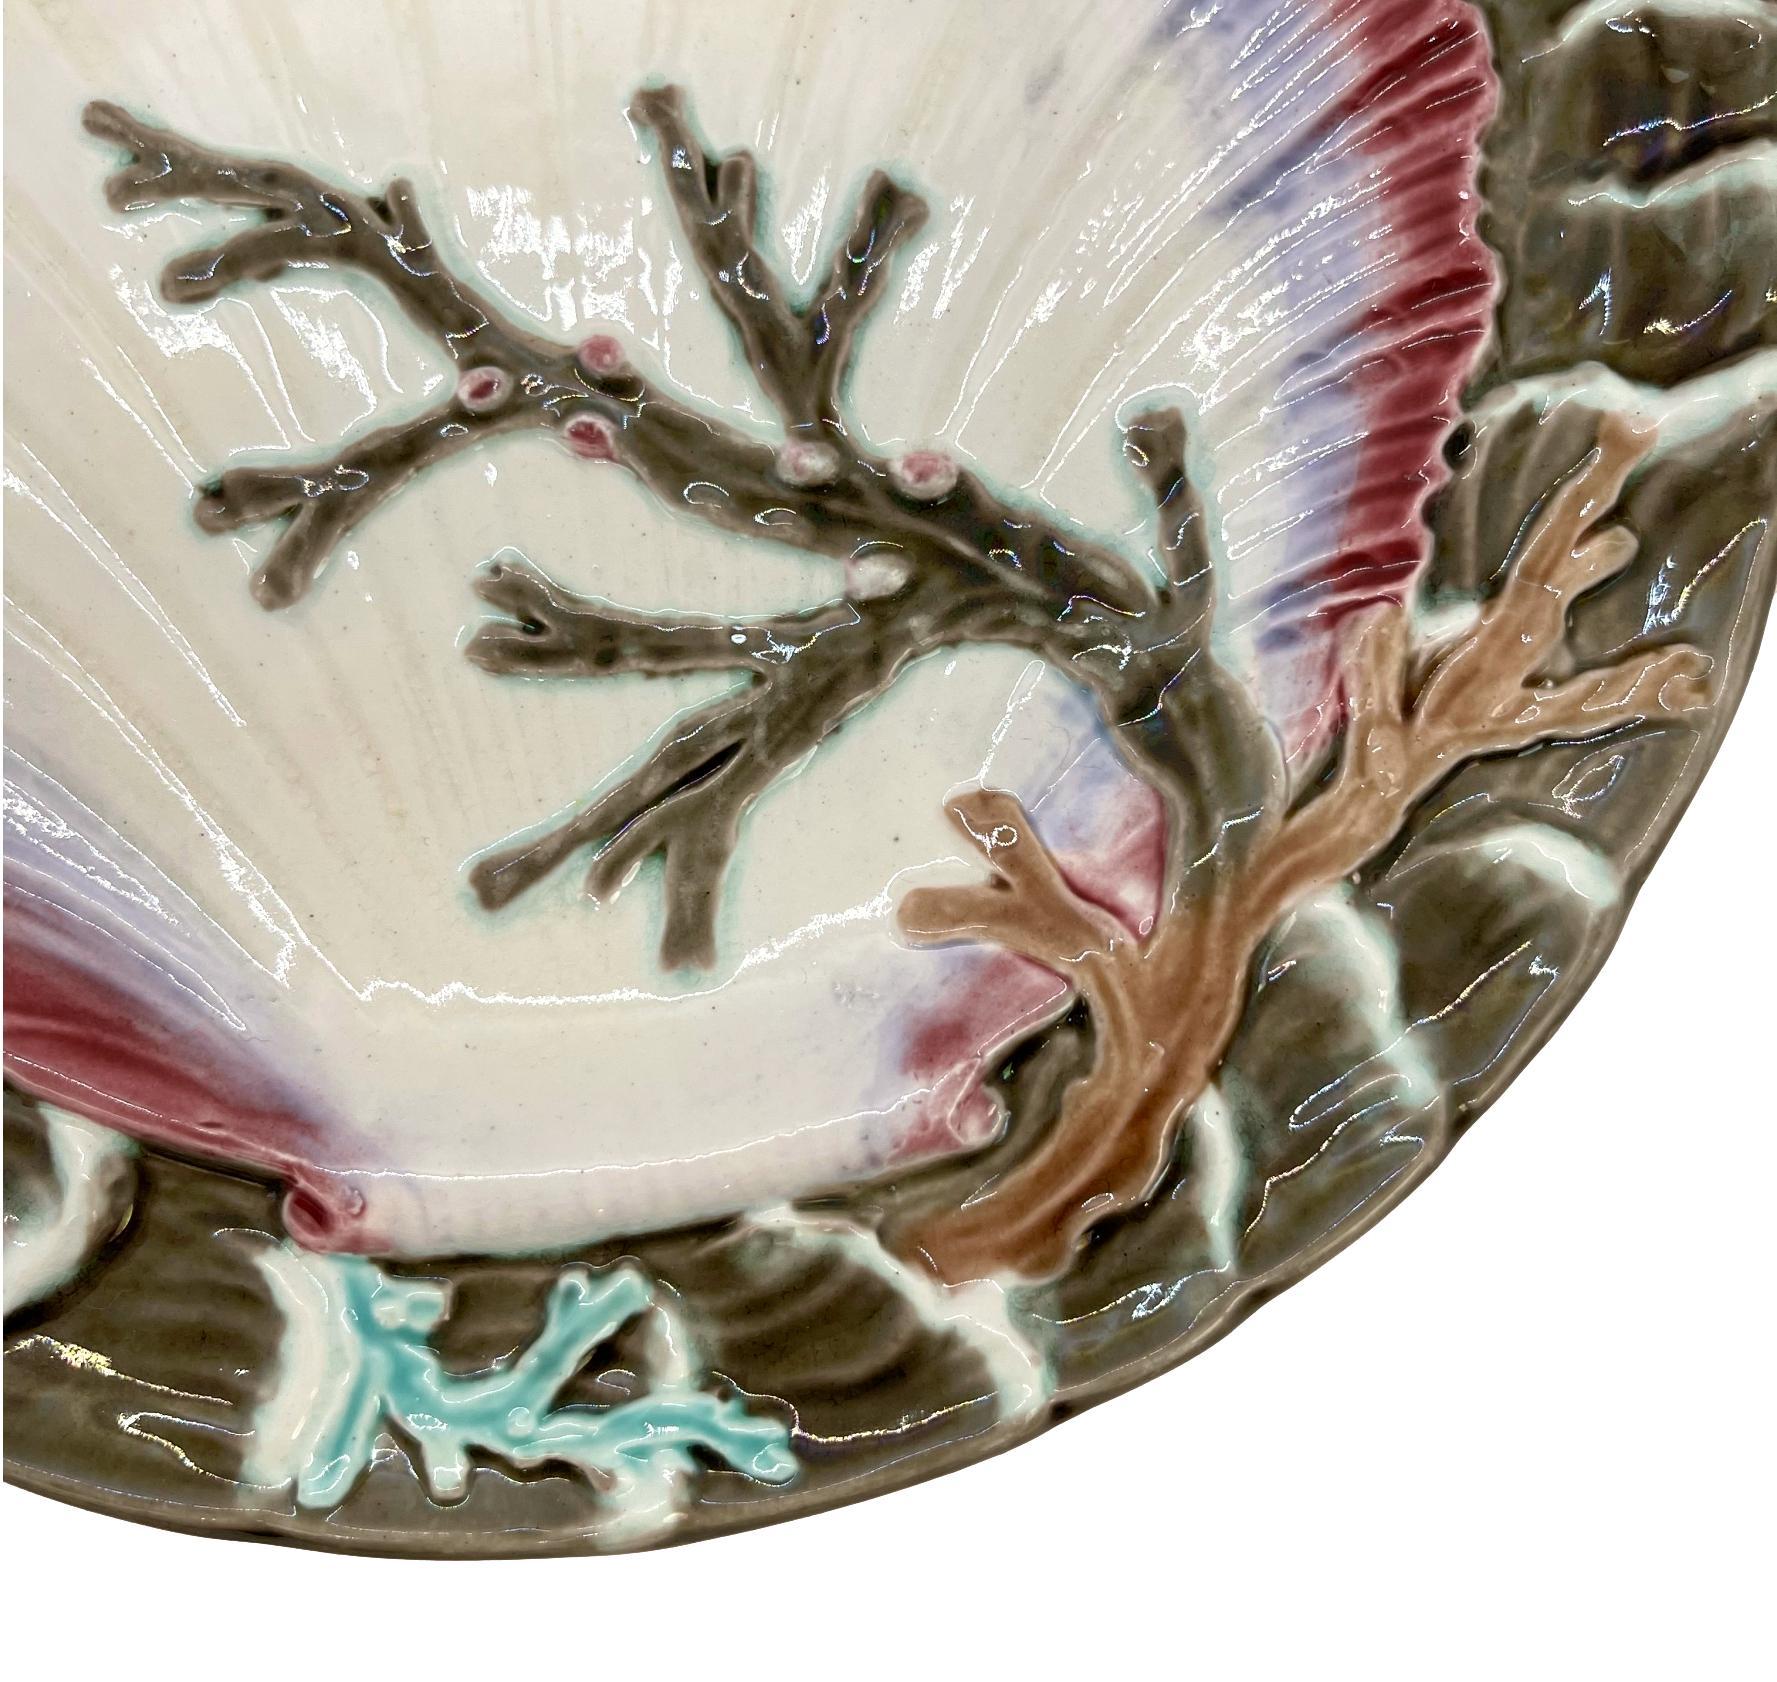 Wedgwood Majolica Ocean plate, with a large central shell and seaweed, bordered with relief-molded waves, the reverse with impressed marks: 'Wedgwood,' and Wedgwood date letter, 'F' for 1877, with underglaze painted design number, '2934,' which